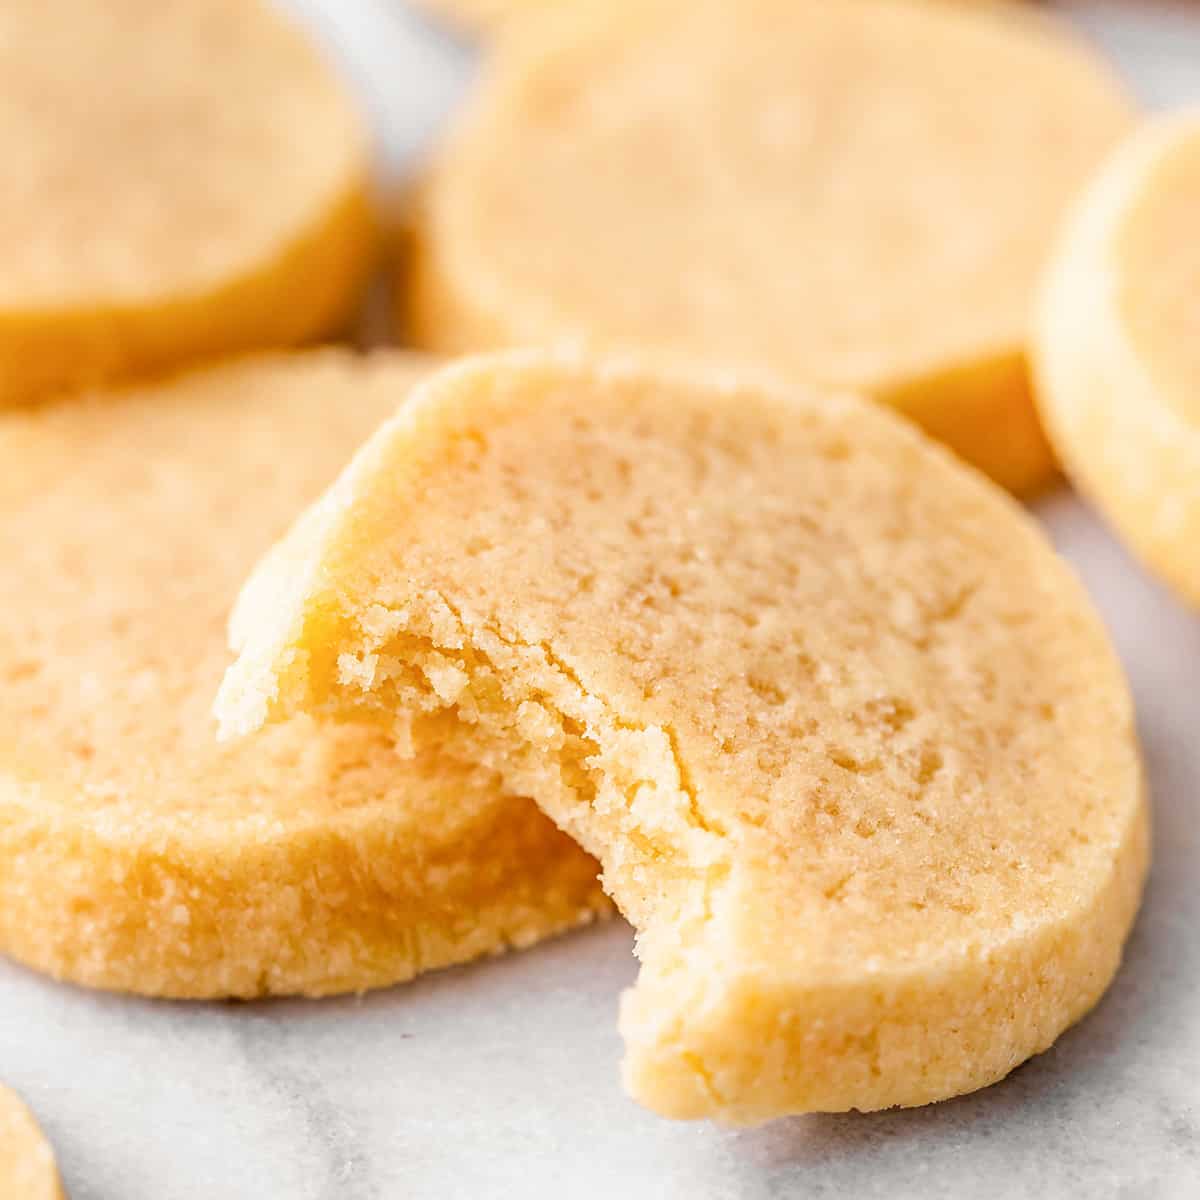 5 Shortbread Cookies, one with a bite taken out of it